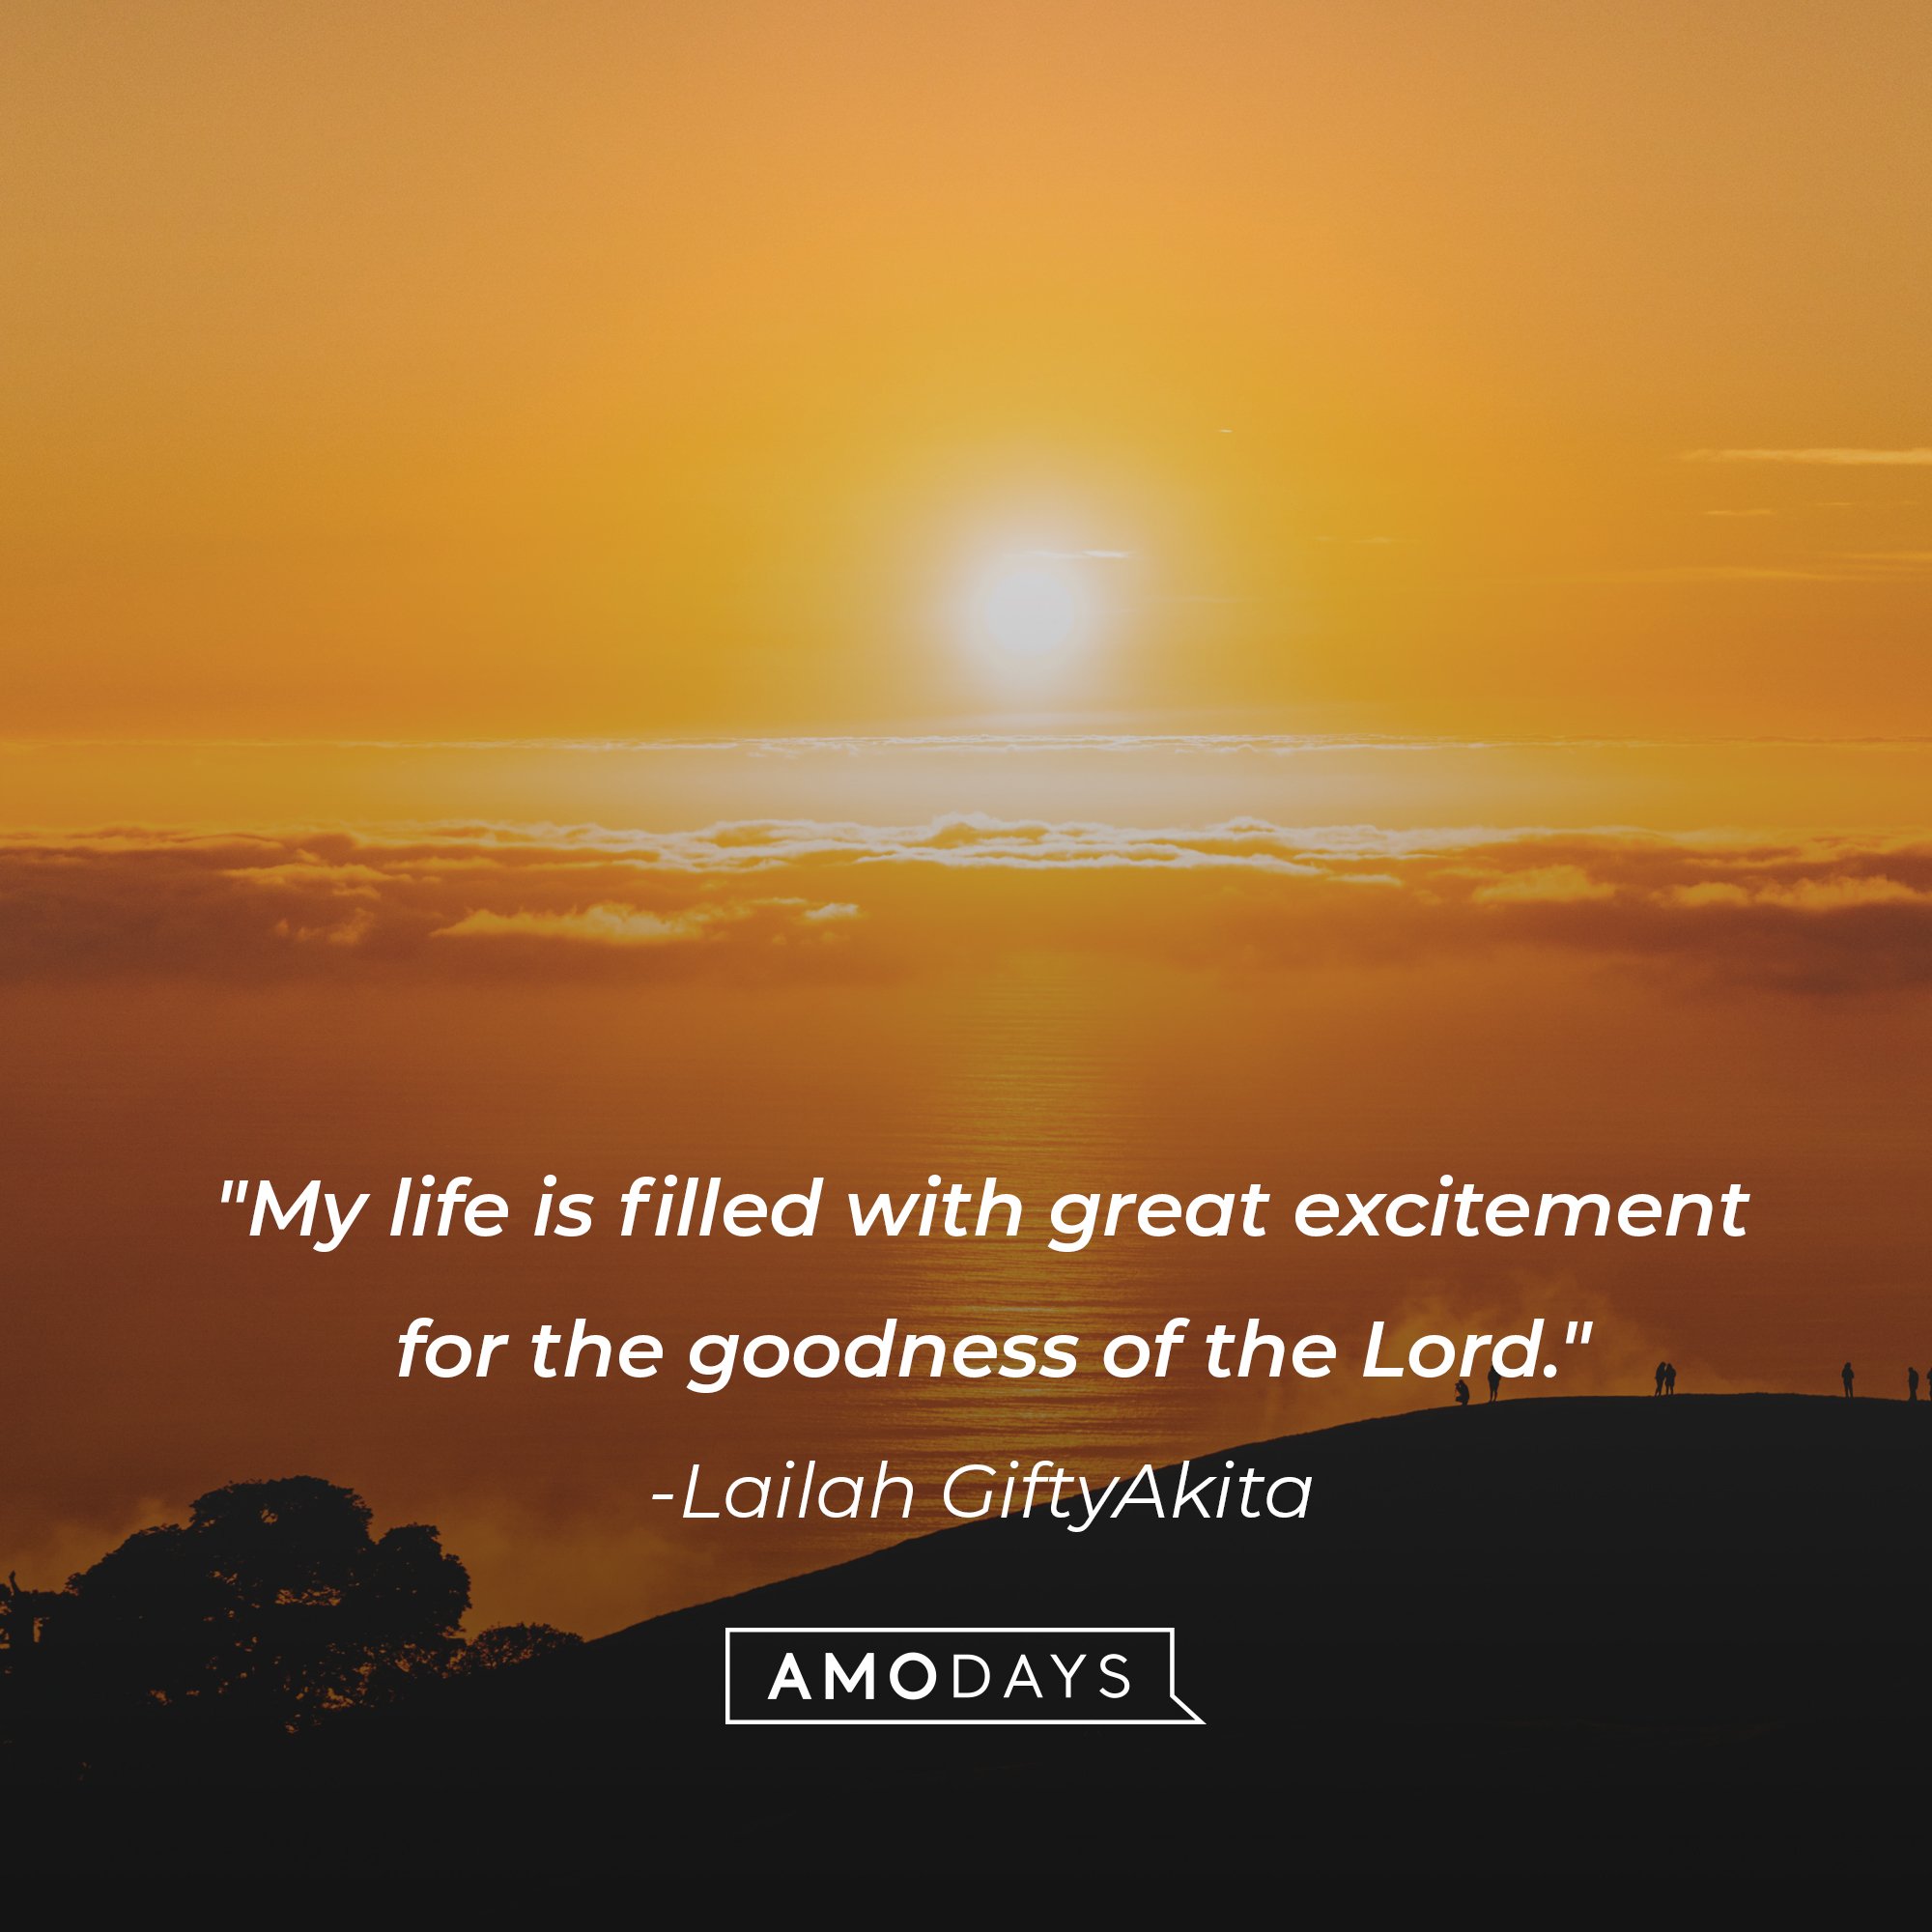 Lailah GiftyAkita’s quote: “My life is filled with great excitement for the goodness of the Lord.” | Image: AmoDays 